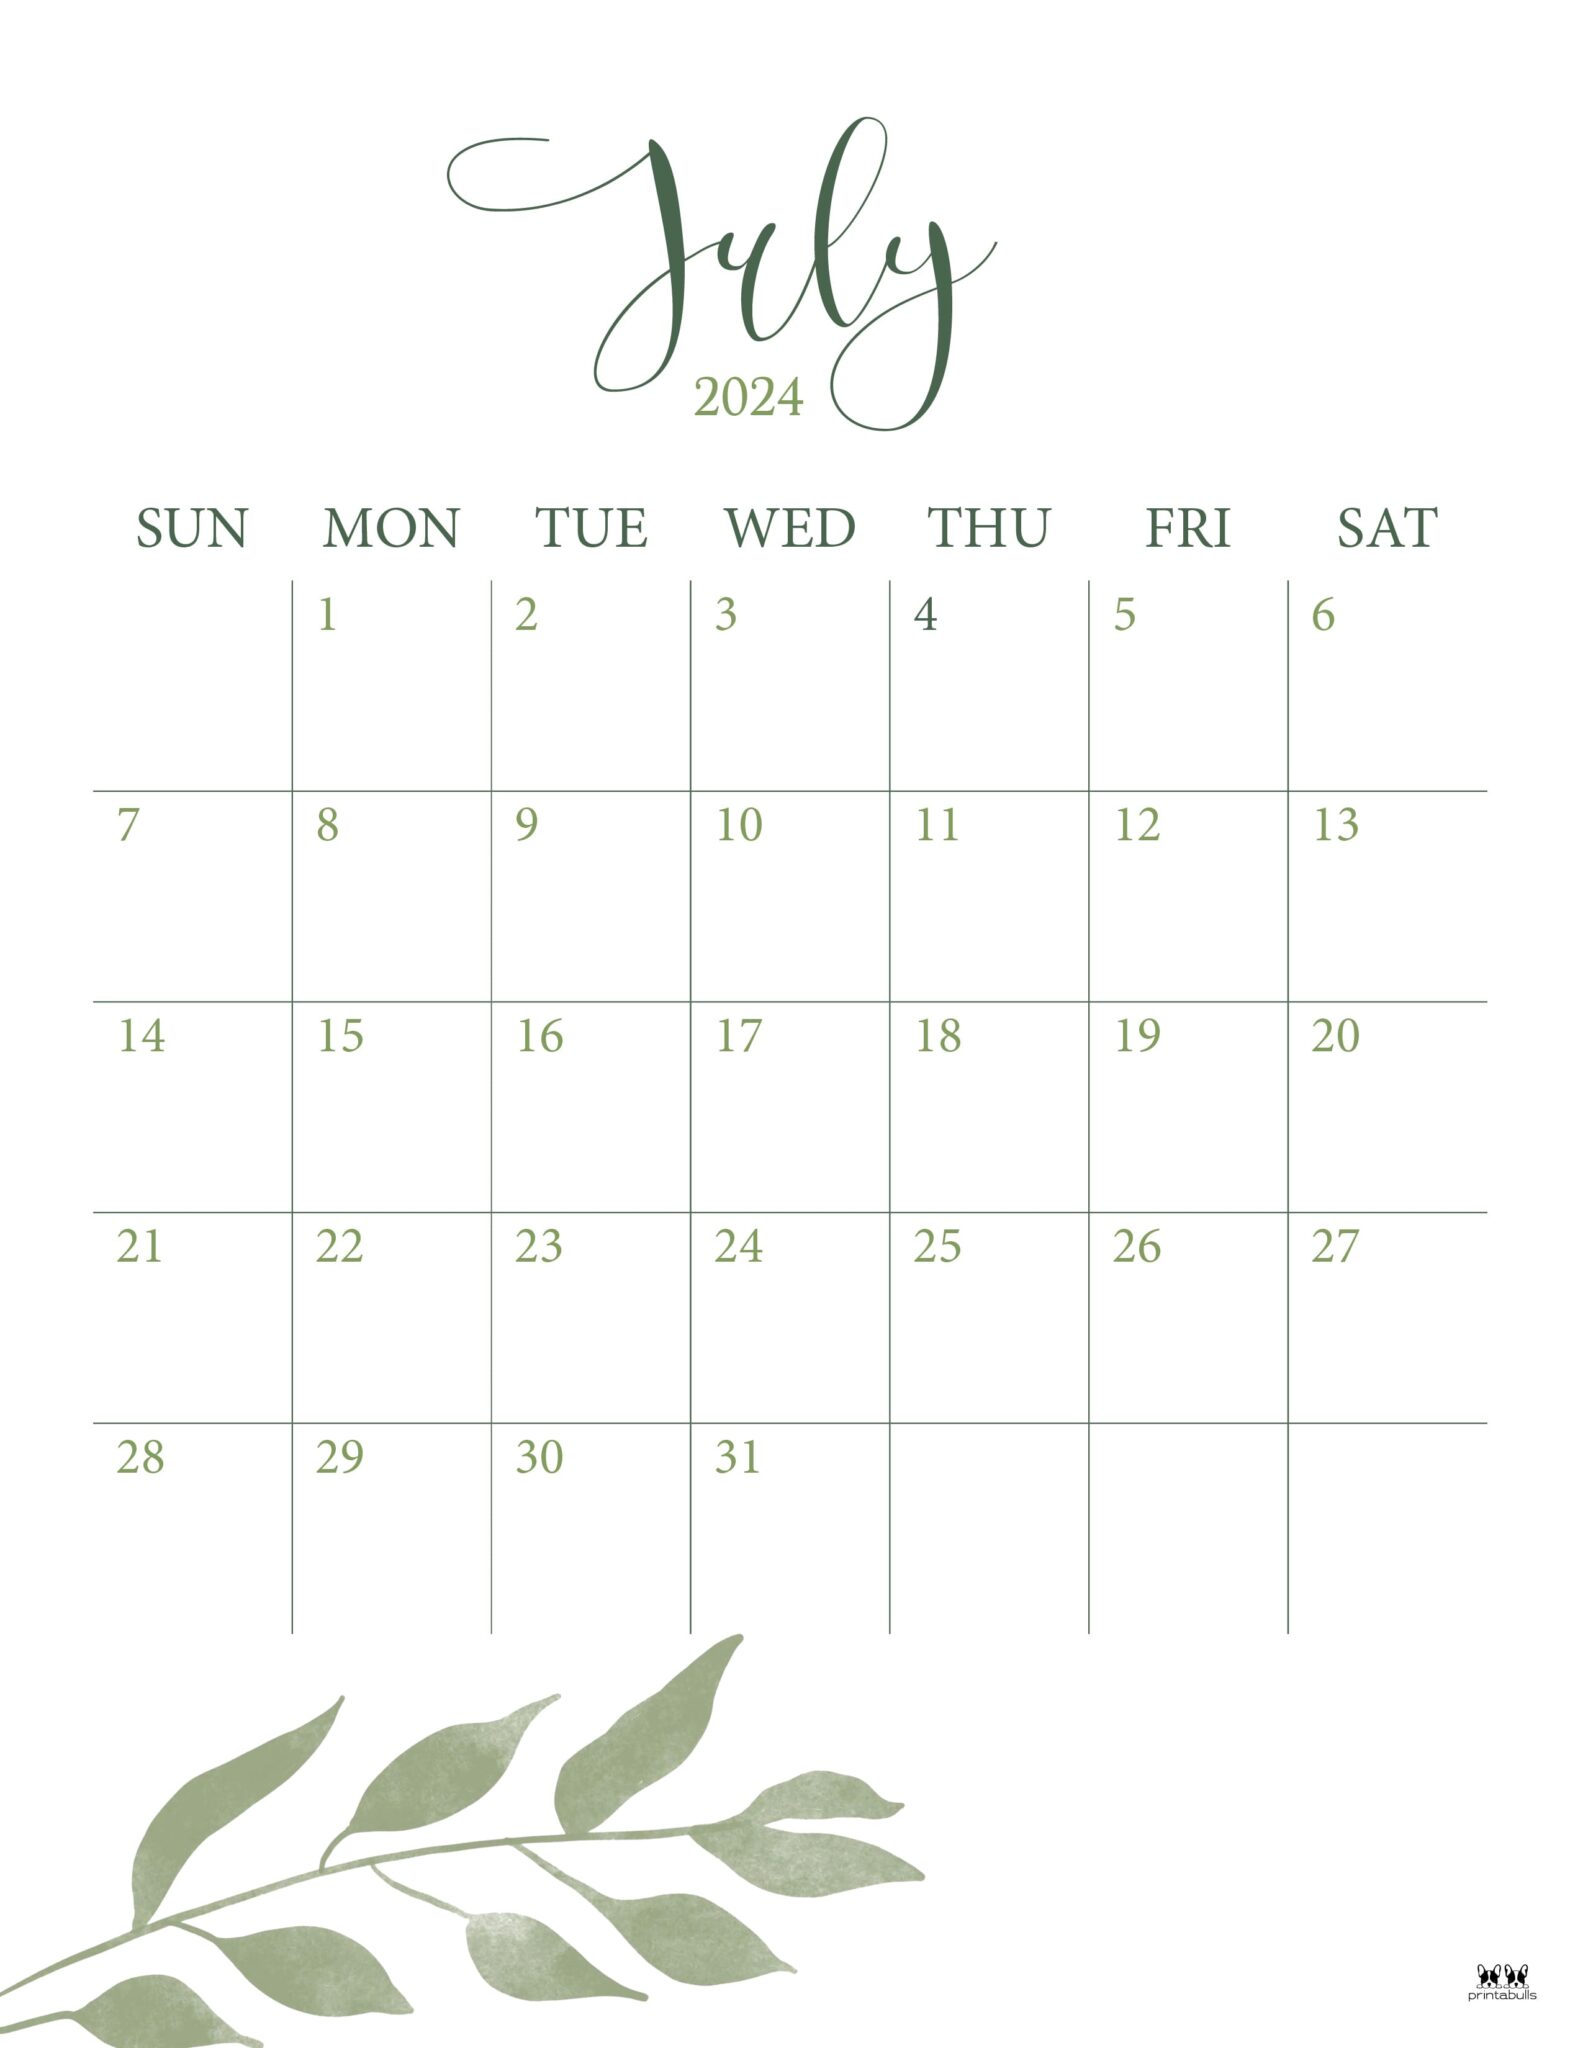 free-printable-july-2023-calendar-templates-with-holidays